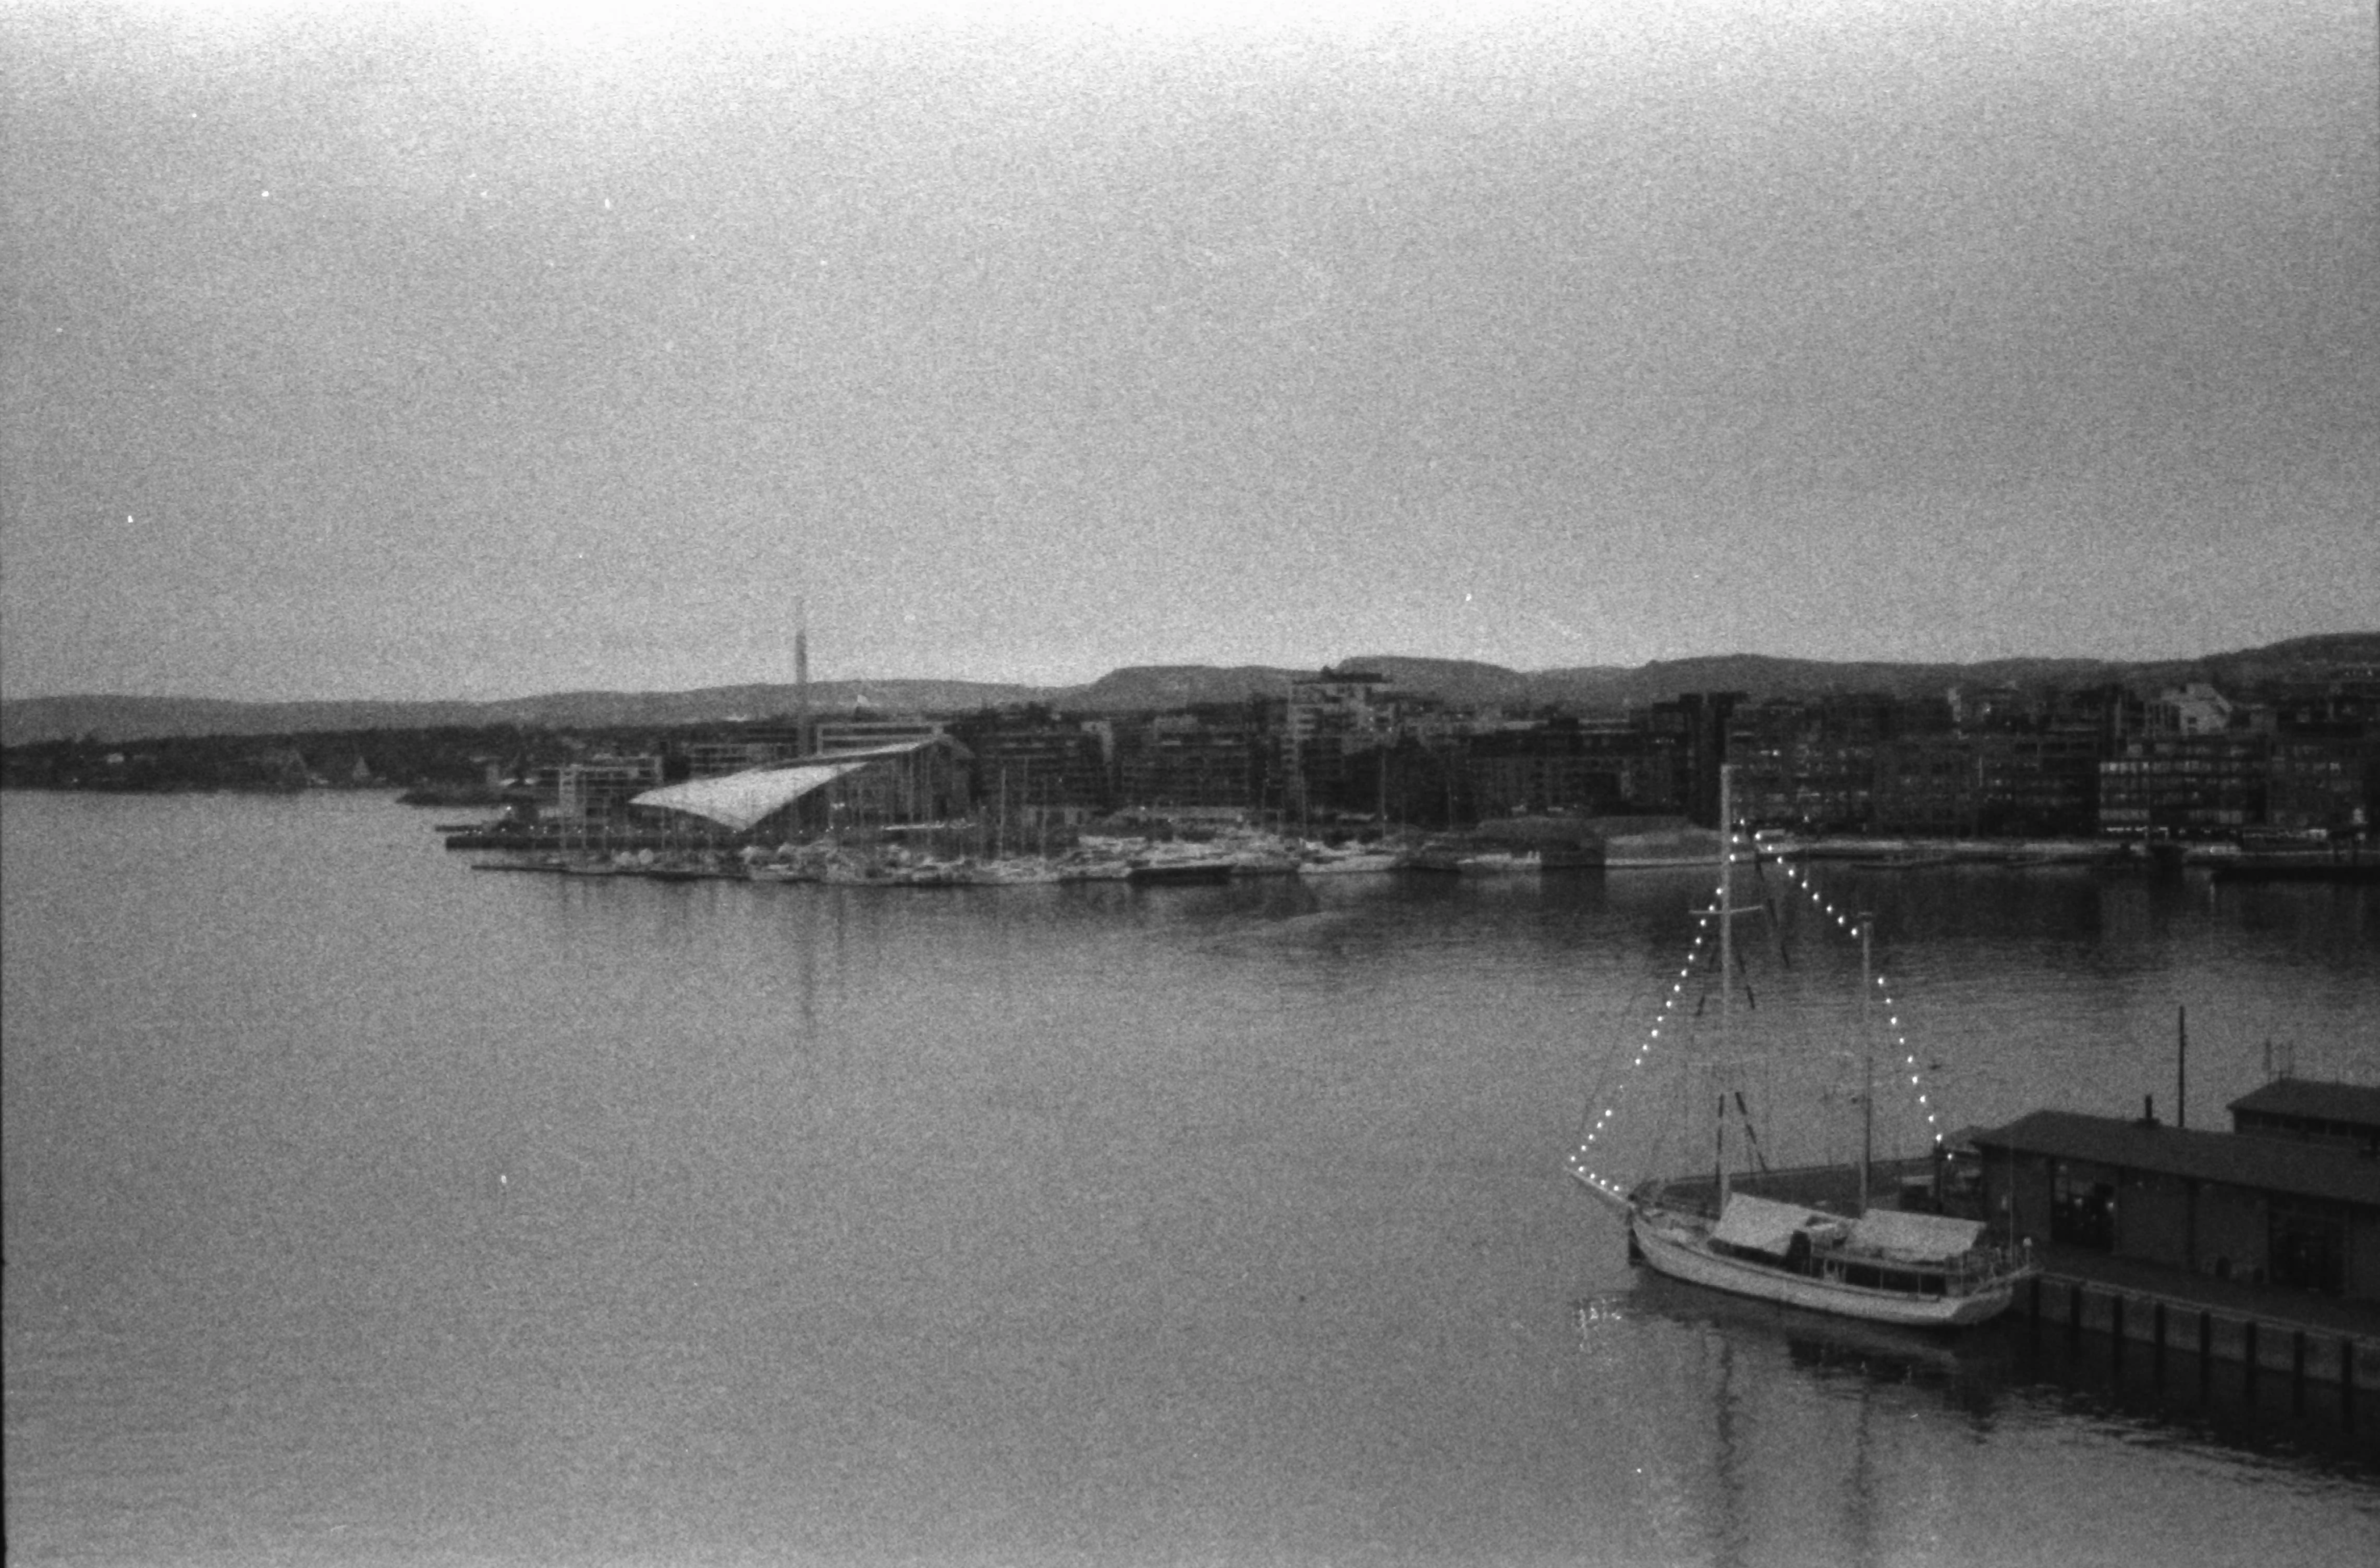 Black and white picture of Oslo’s coast featuring some boats and some obscure buildings